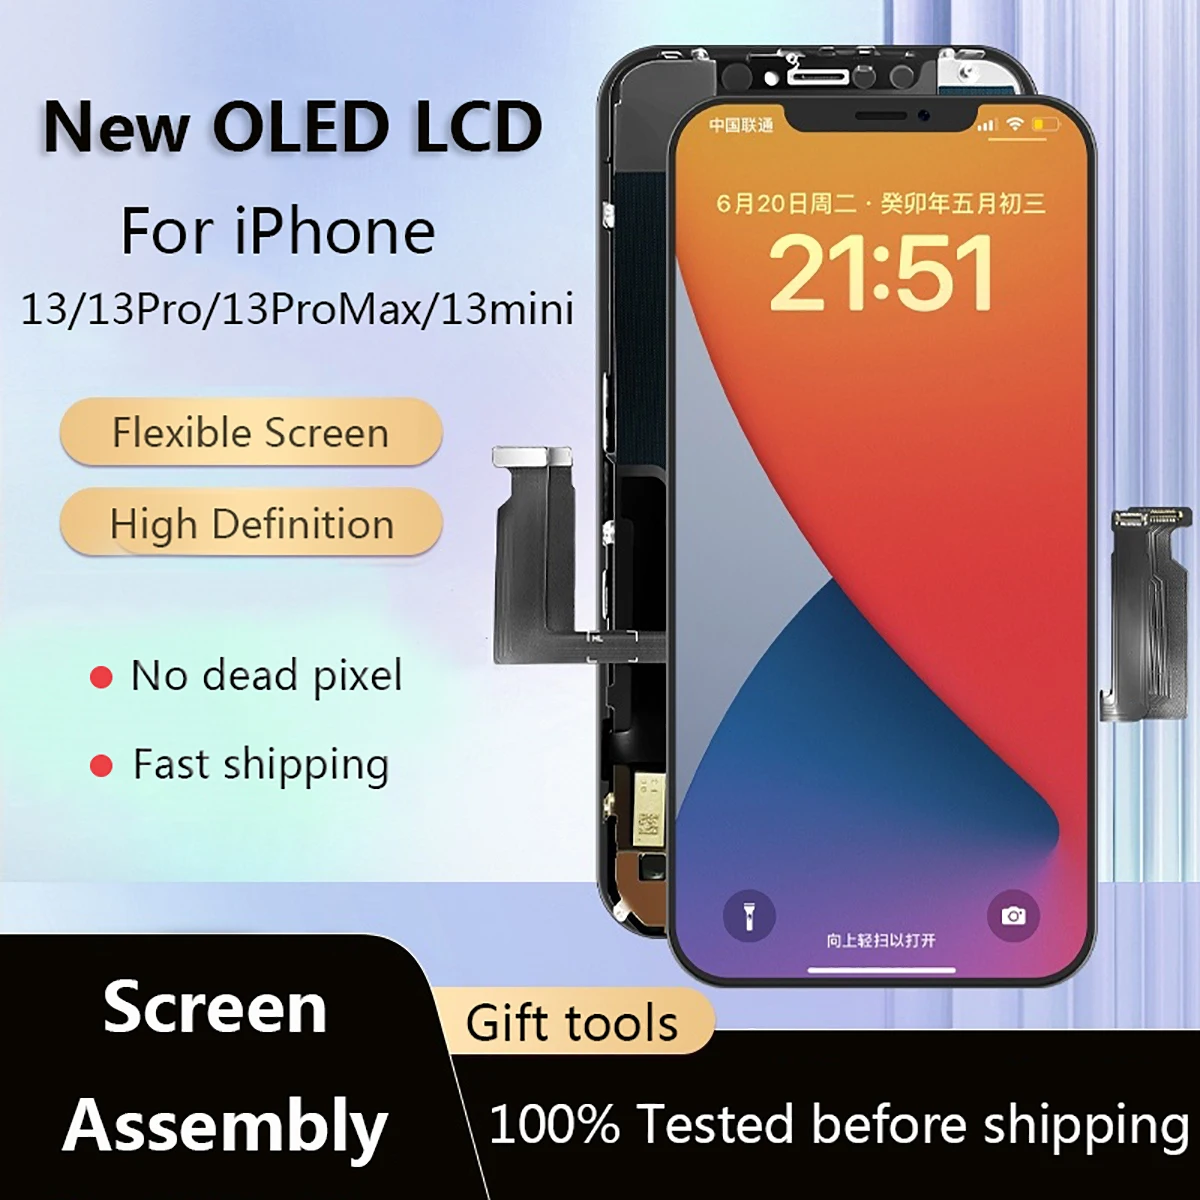 

OLED LCD For iPhone 13 Pro Max 13 Mini New Screen Assembly No dead pixel High Definition Flexible Display Screen 100% Tested